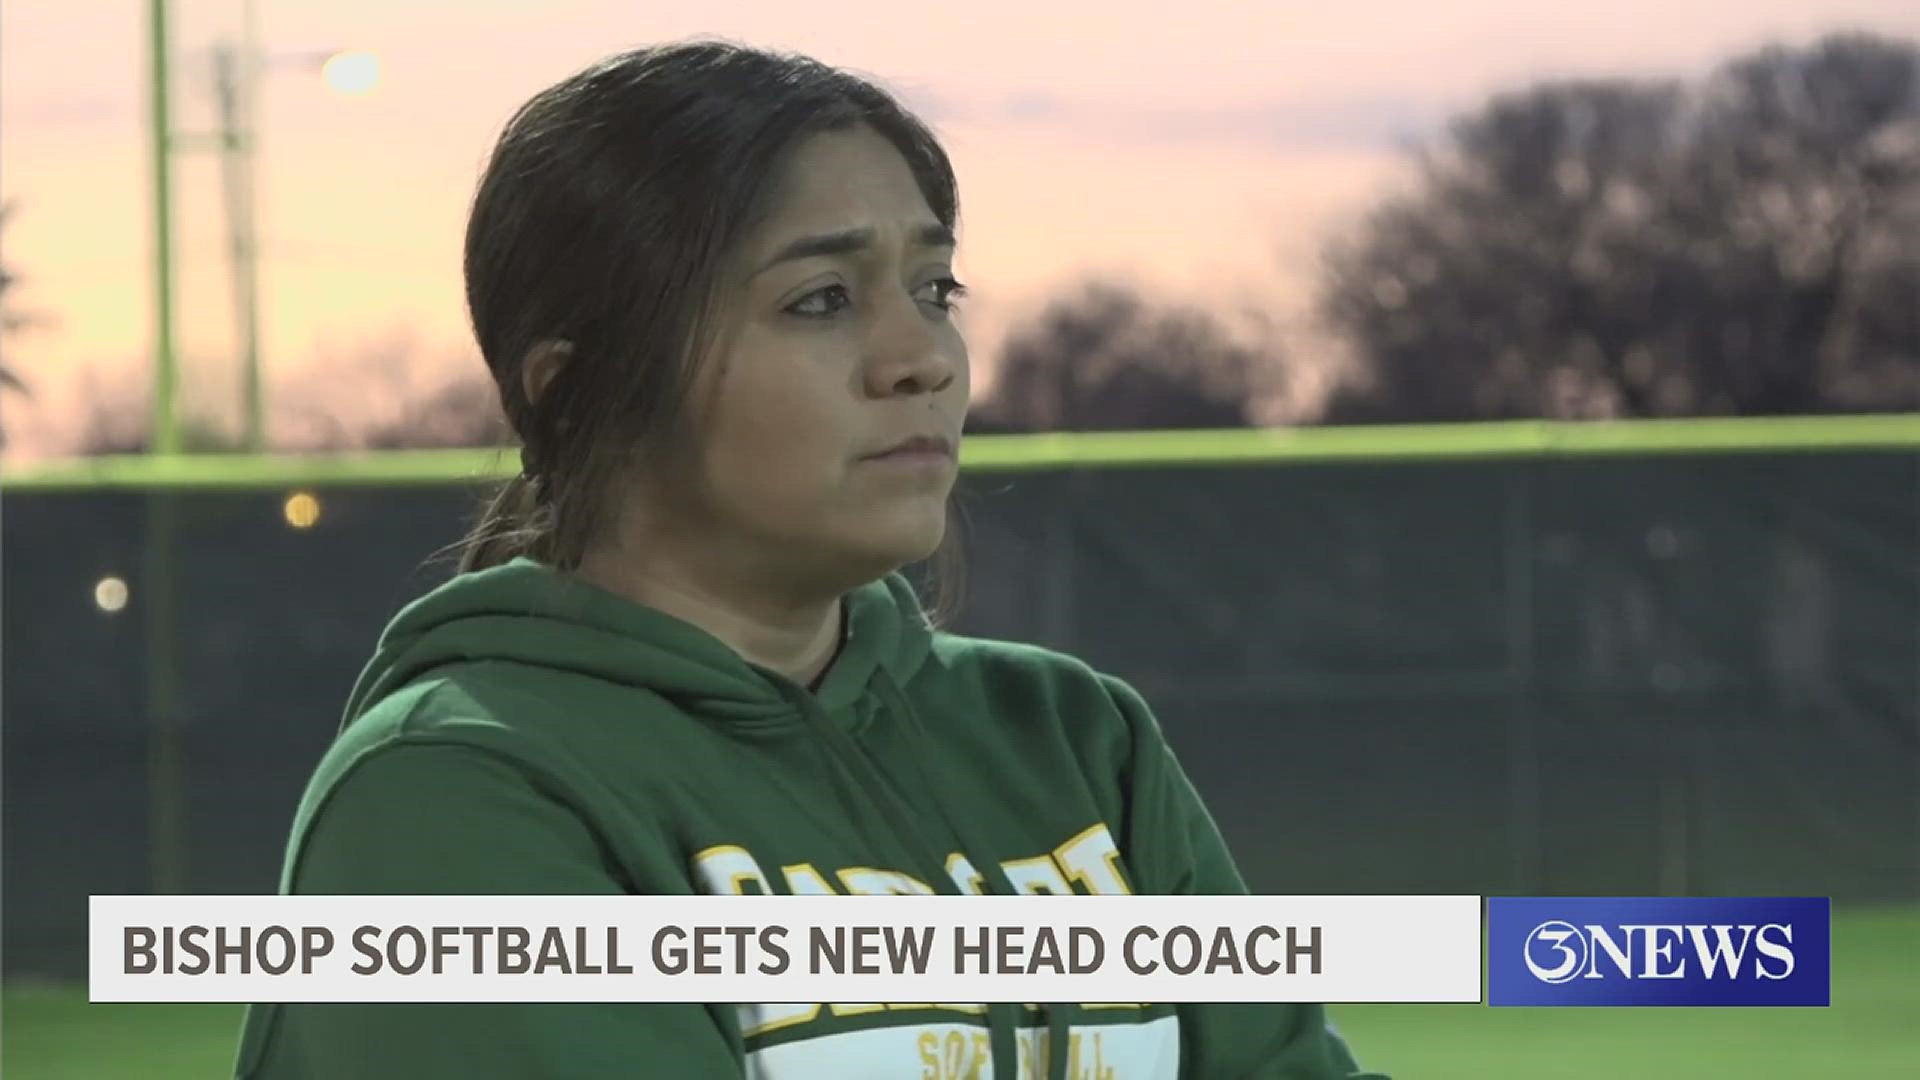 Johnnieann Lopez will be in her first varsity head coaching position ever. She was the assistant head coach before, then previously at the junior high level.